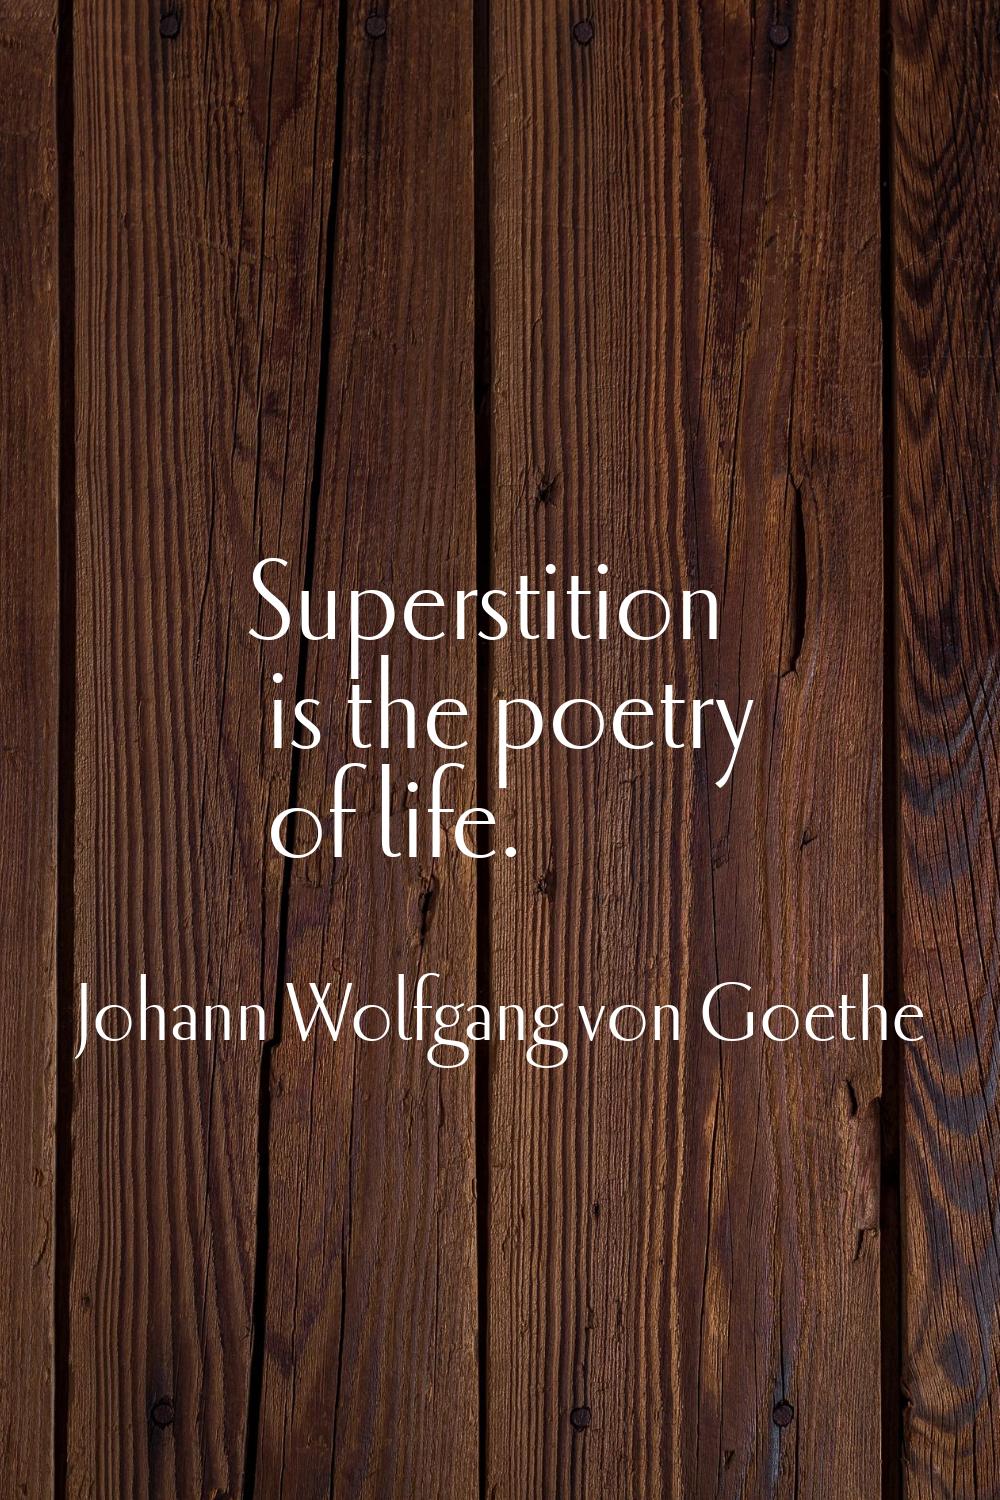 Superstition is the poetry of life.